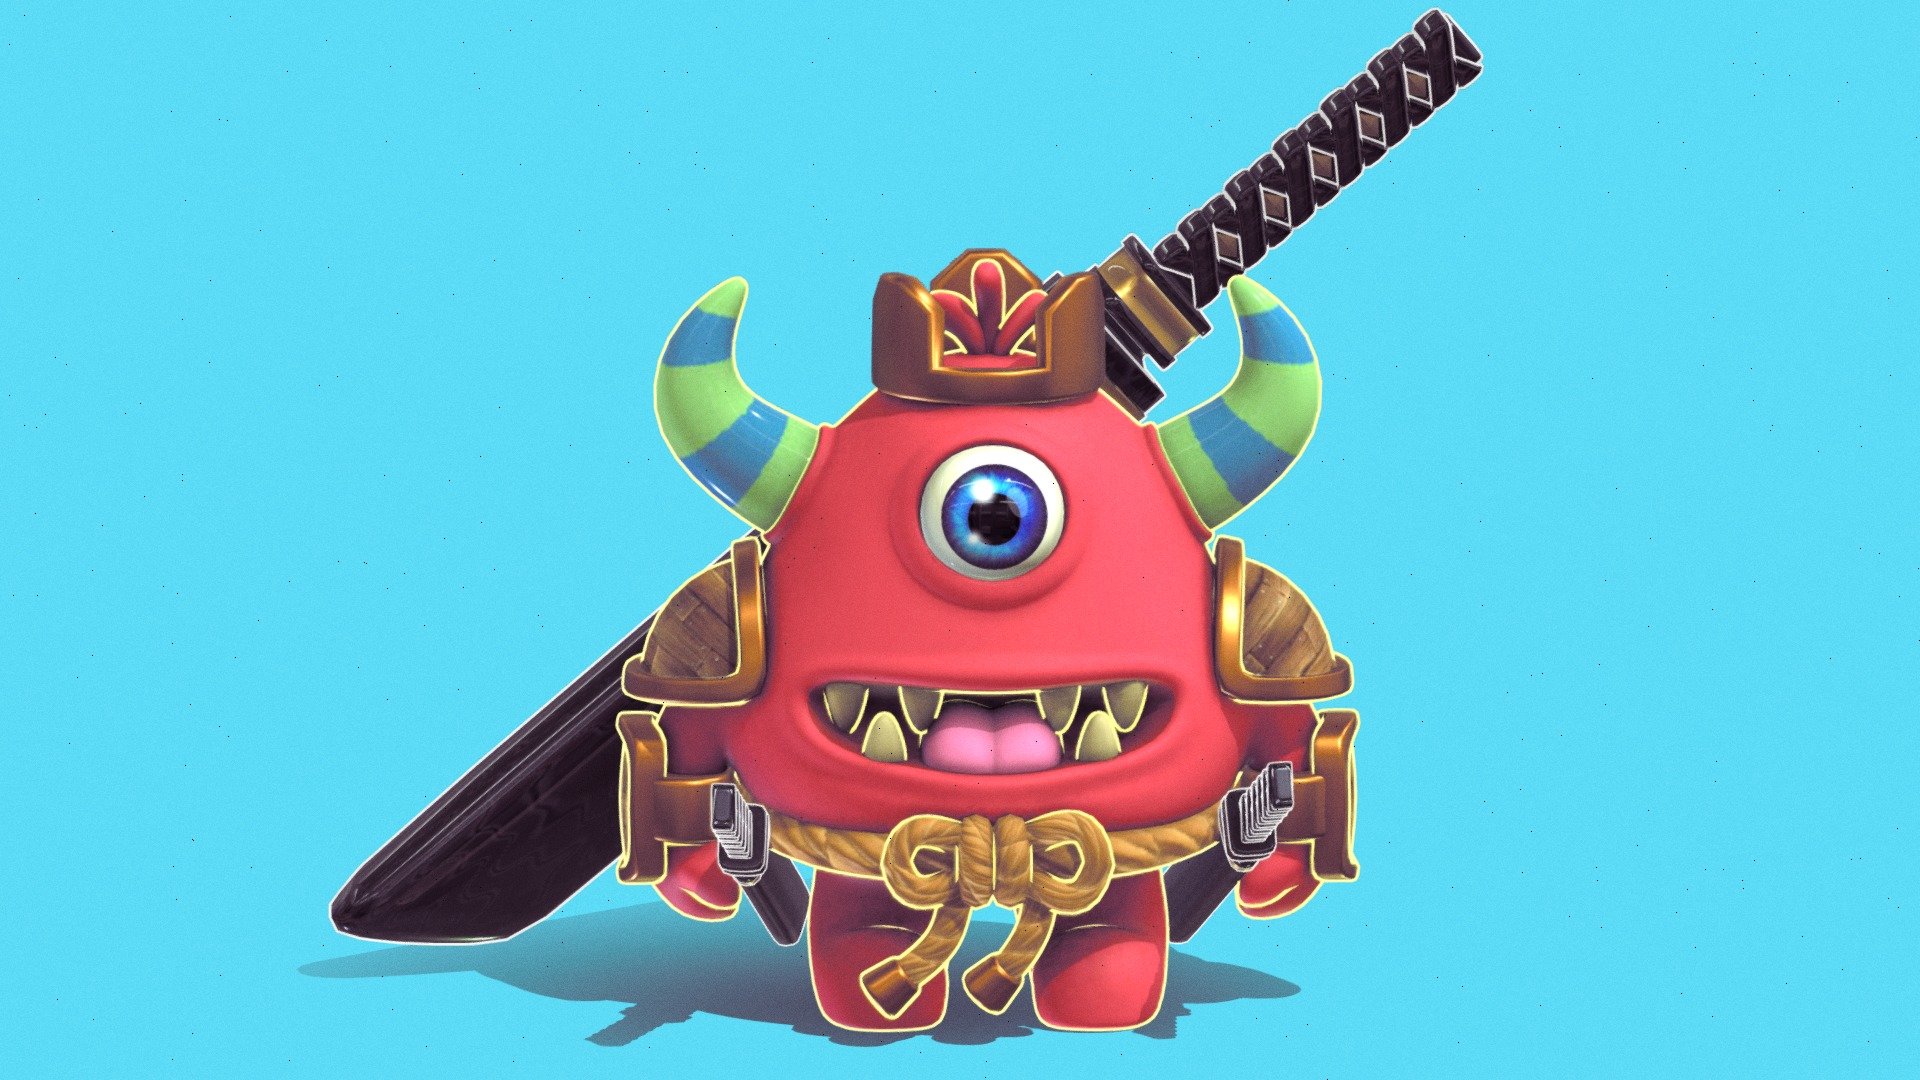 Hi everyone i hope you are doing well. For this week challenge i tried to create a monster inspired by a samurai. all are modeled and texture in blender. I love blender 3d model